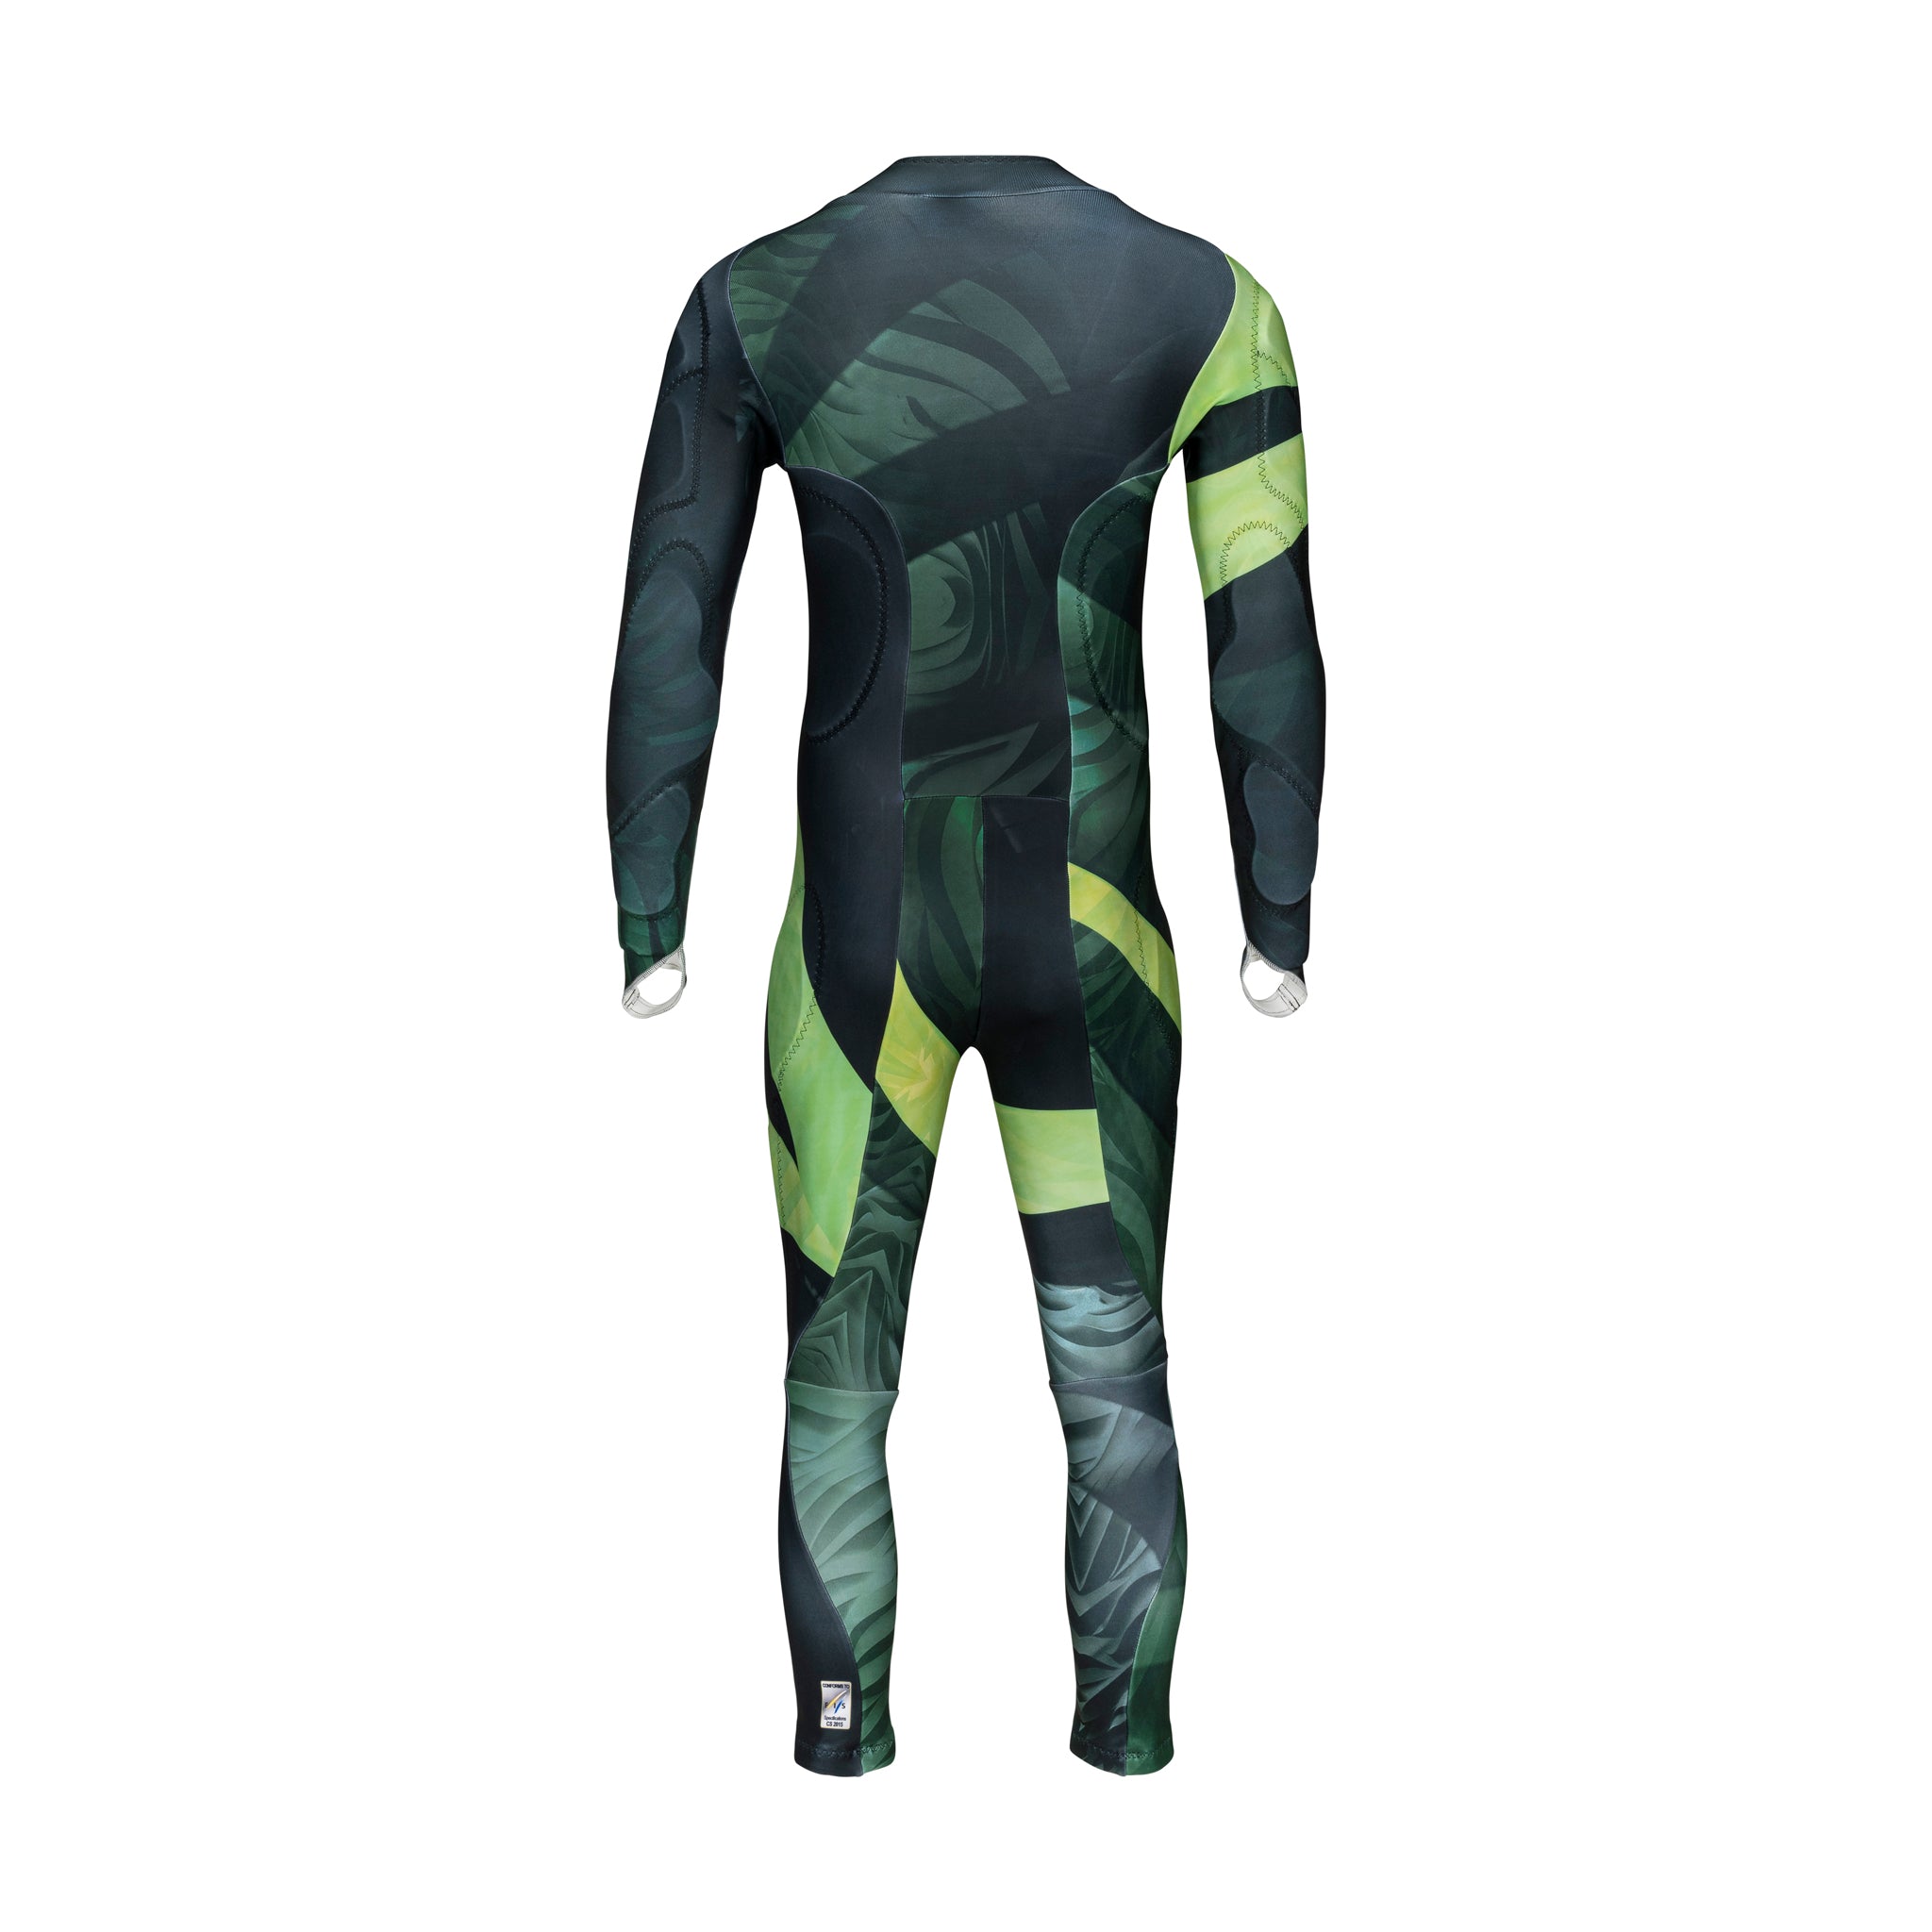 sync-performance-tiger-adult-suit-green-back